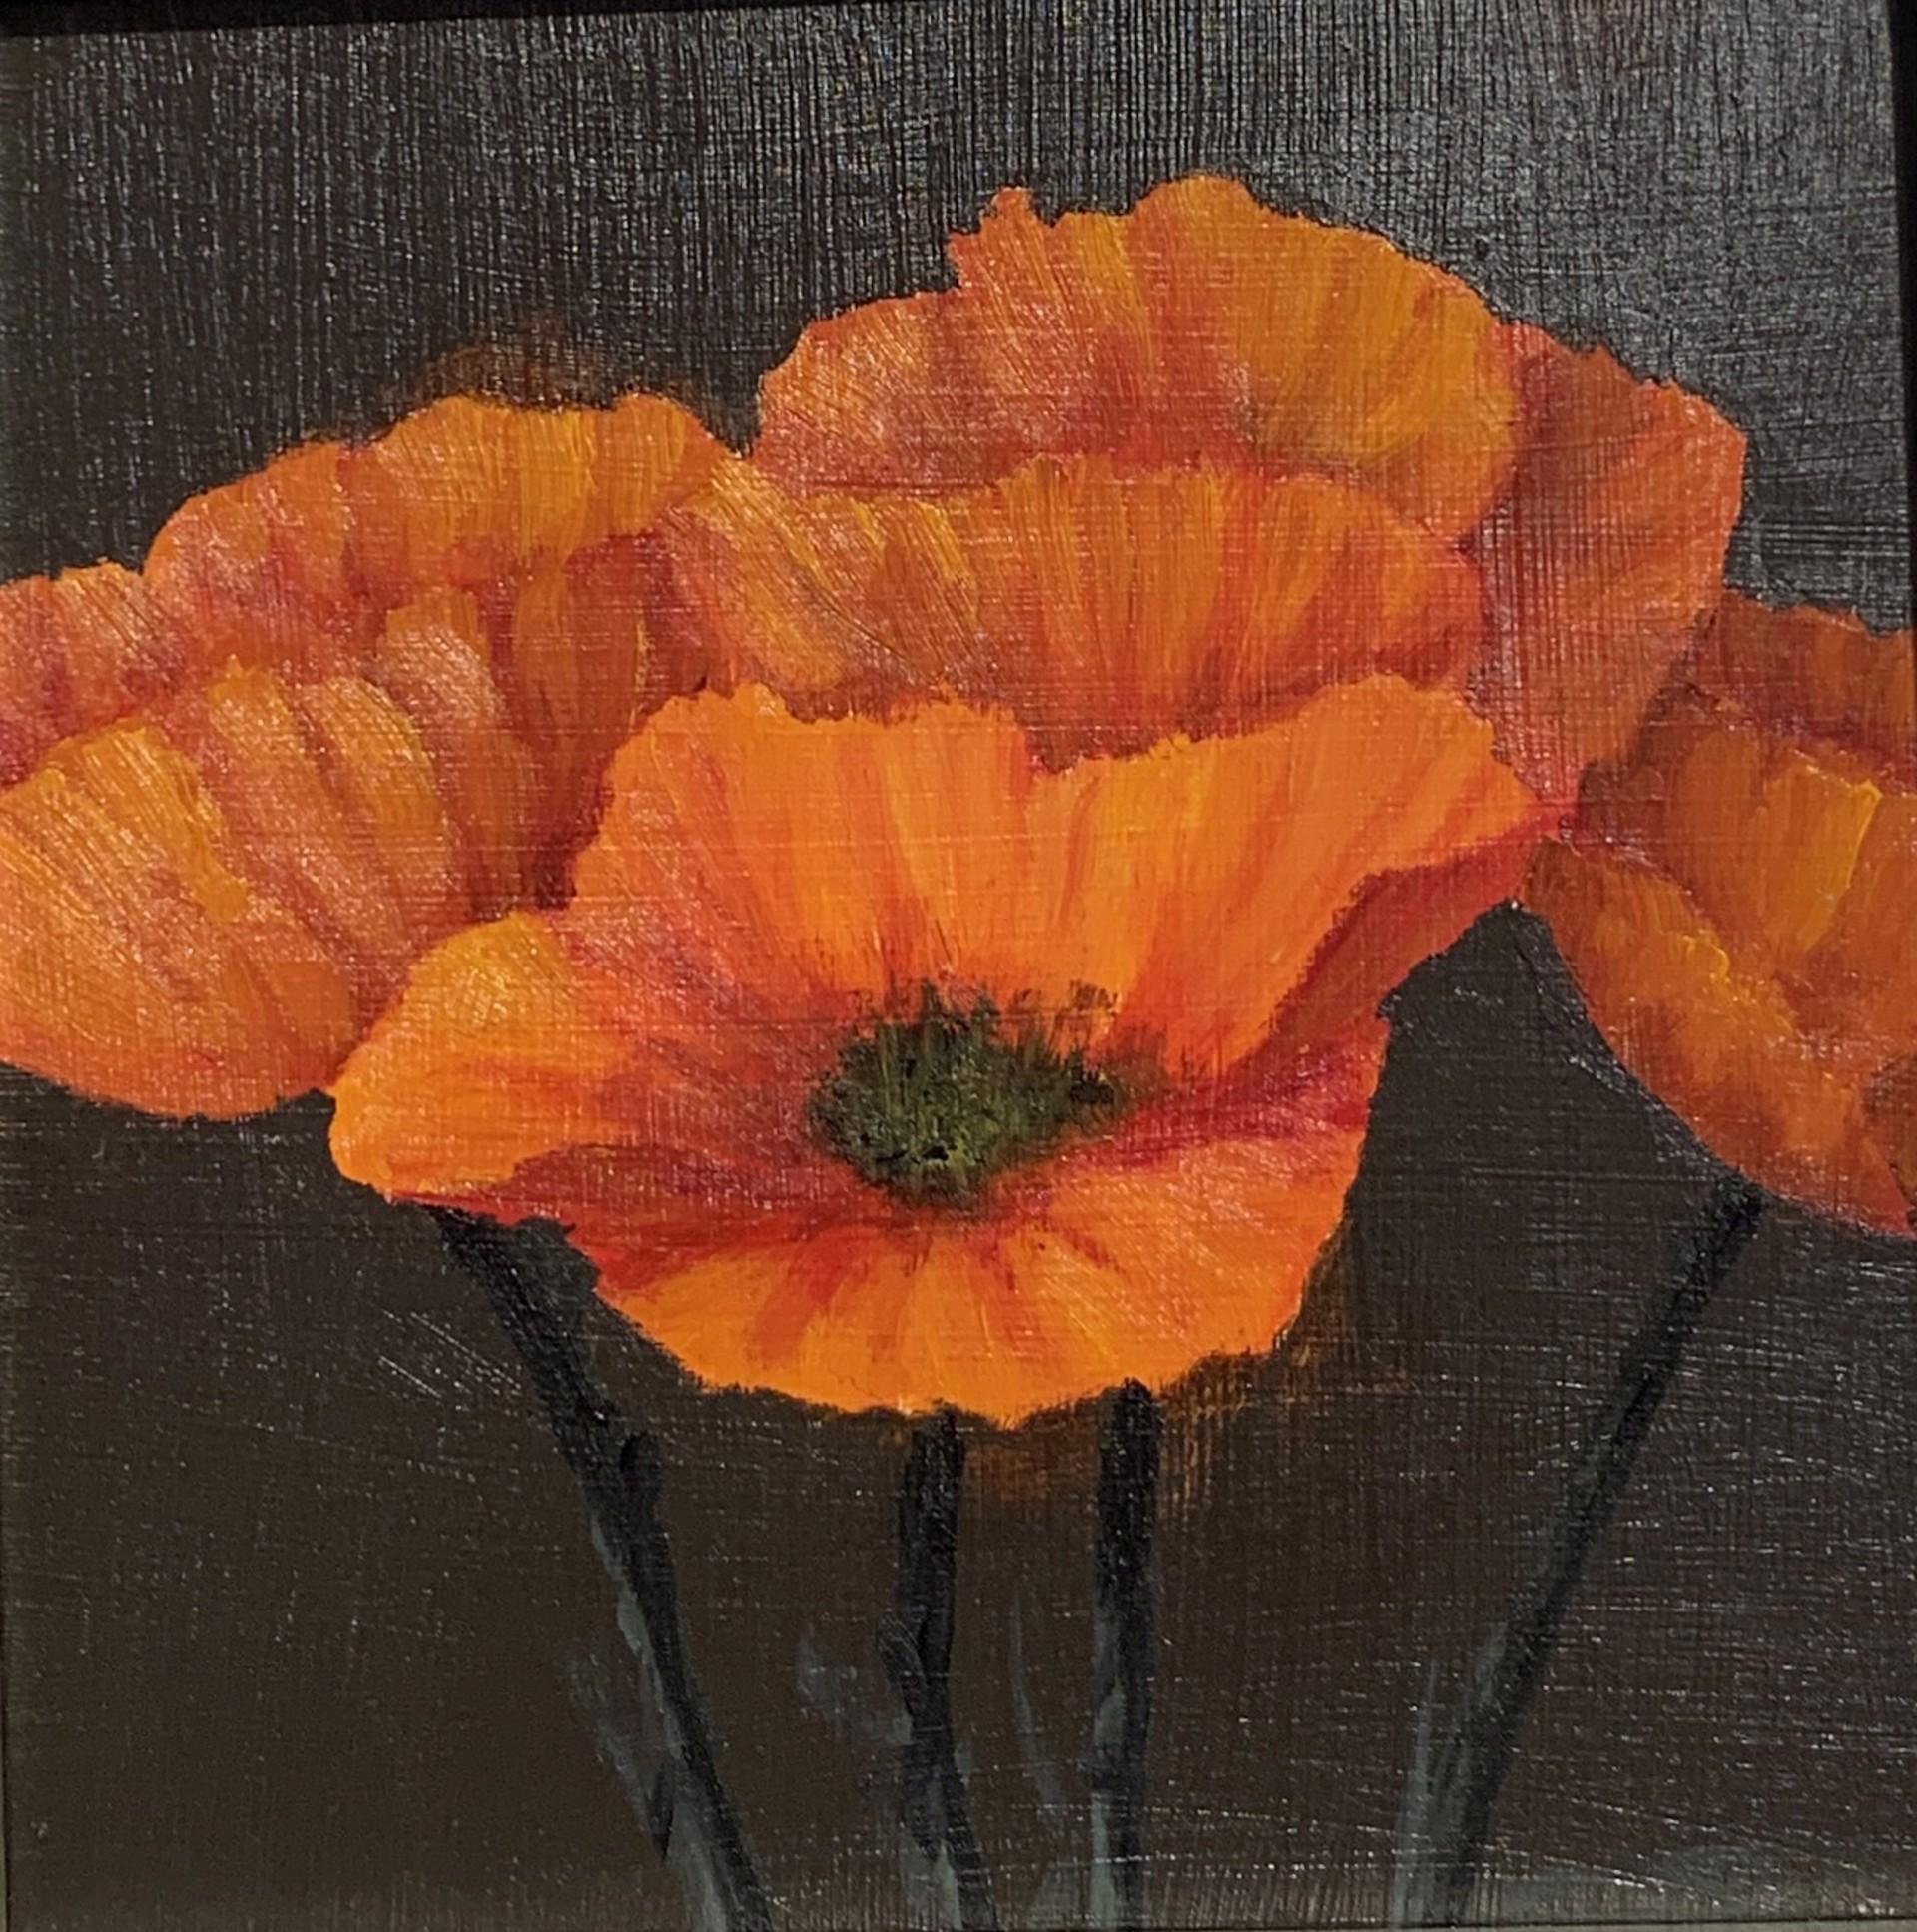 Poppies by Gregory Smith